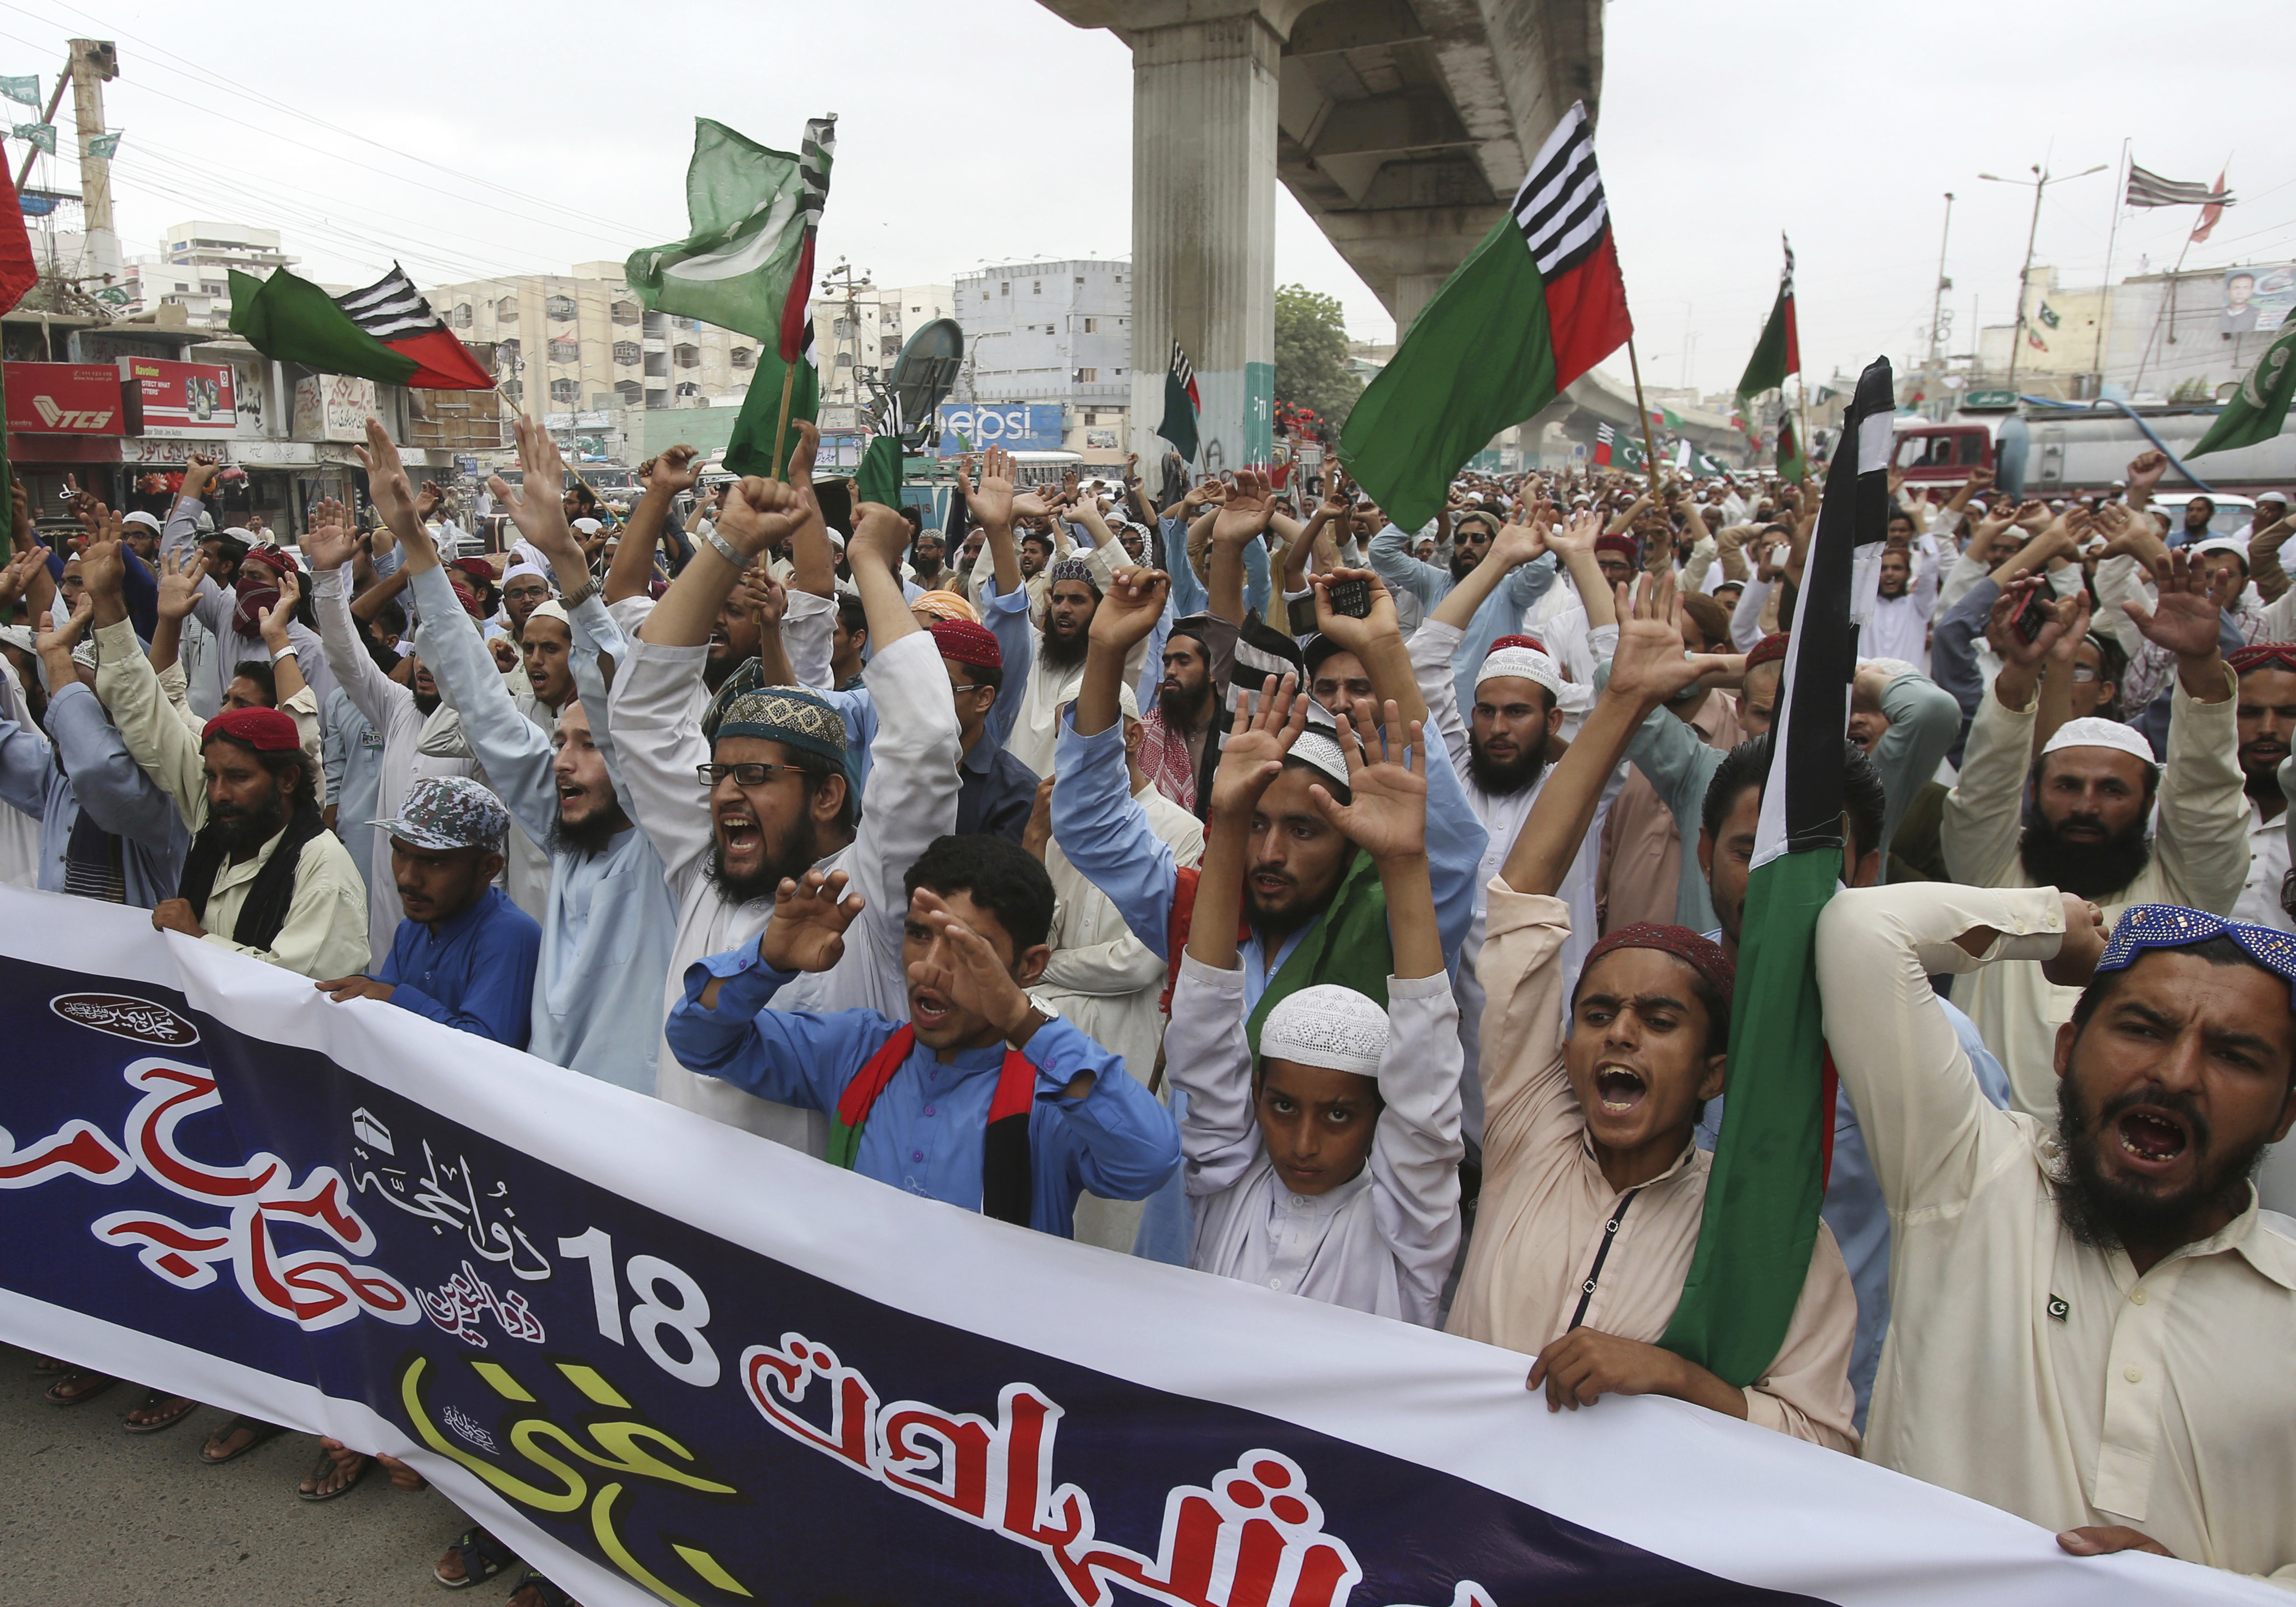 Pakistani protesters demonstrate to condemn the planned anti-Islam cartoon contest, in Karachi, Pakistan, Thursday, Aug. 30, 2018. Thousands of hard-line Islamists angered over a far-right Dutch lawmaker's plans to hold a Prophet Muhammad cartoon contest marched toward Pakistan's capital. (AP Photo/Fareed Khan)